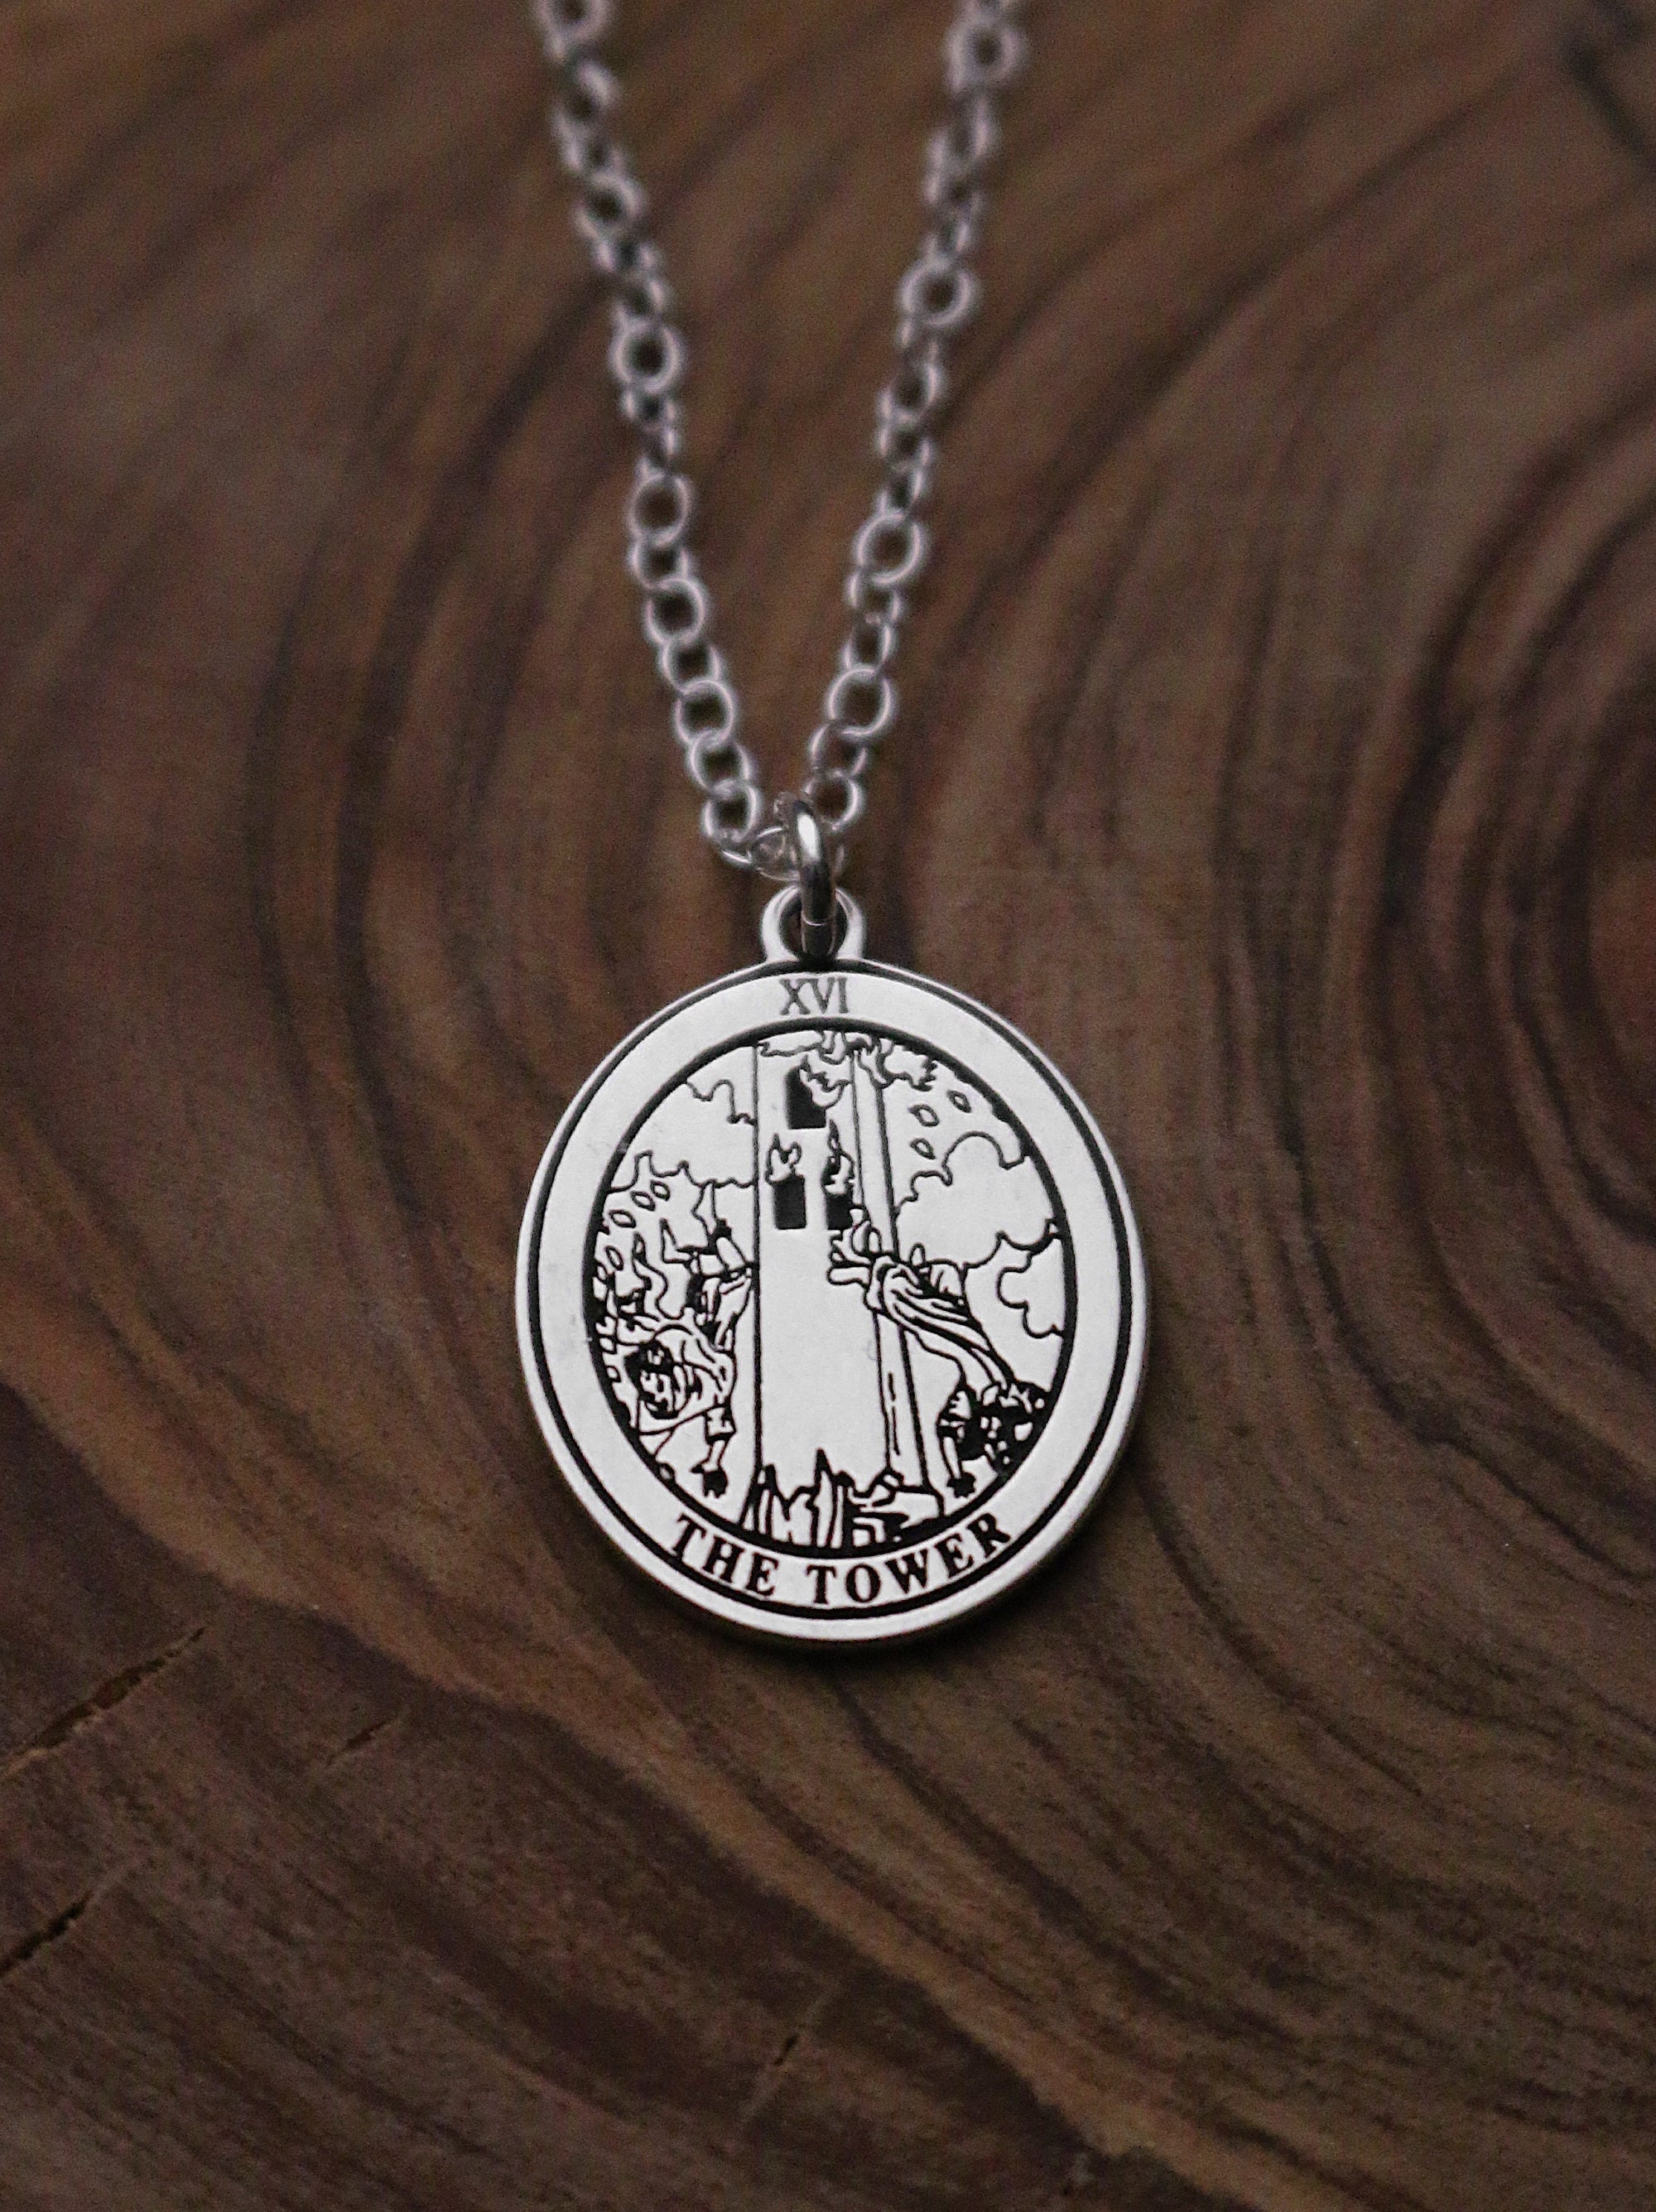 22 CARDS: Dainty Tarot Card Amulet Sterling Charm Necklace | Best Friend Birthday Gift | Round Tarot Card Necklace | Celestial Mystical